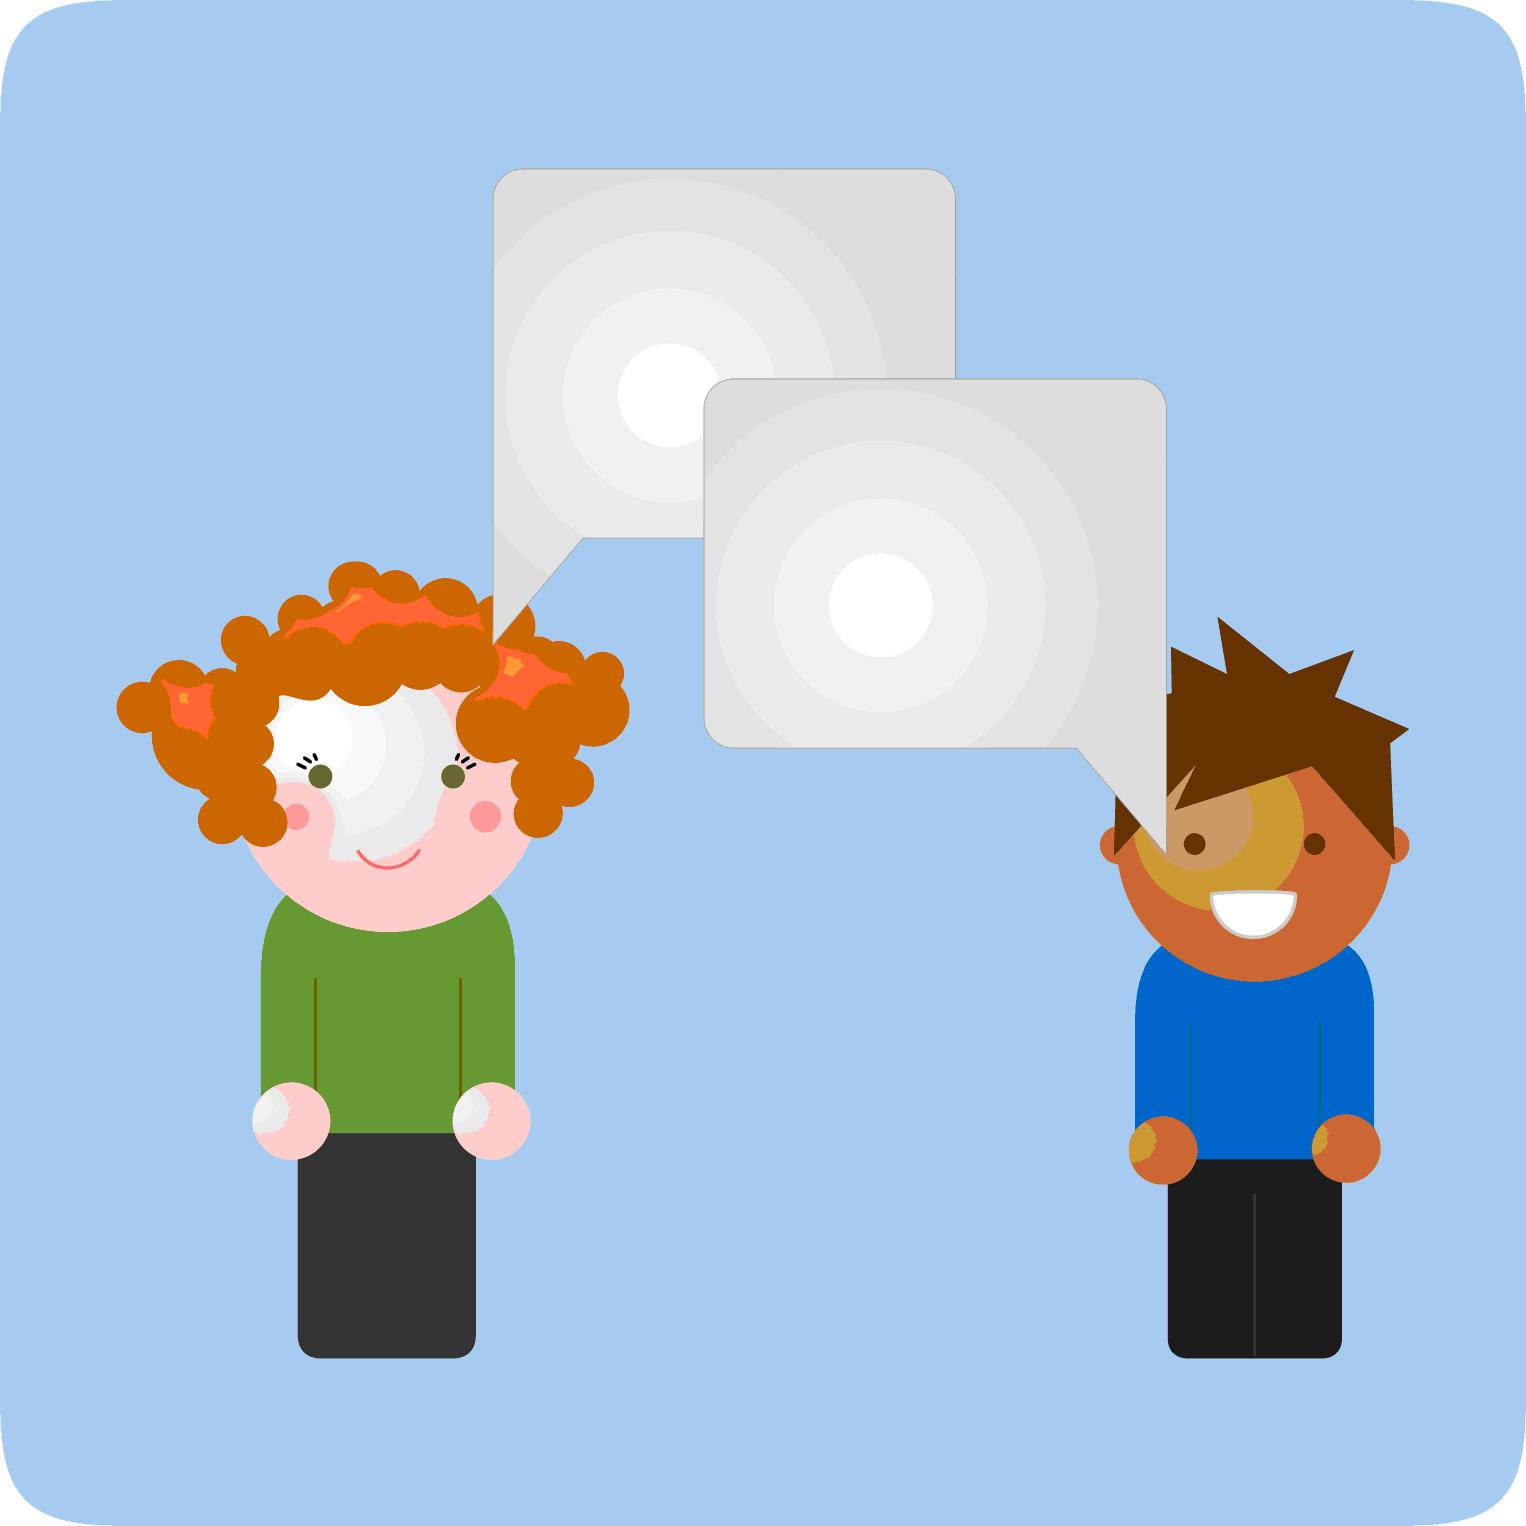 Images Of People Speaking - ClipArt Best